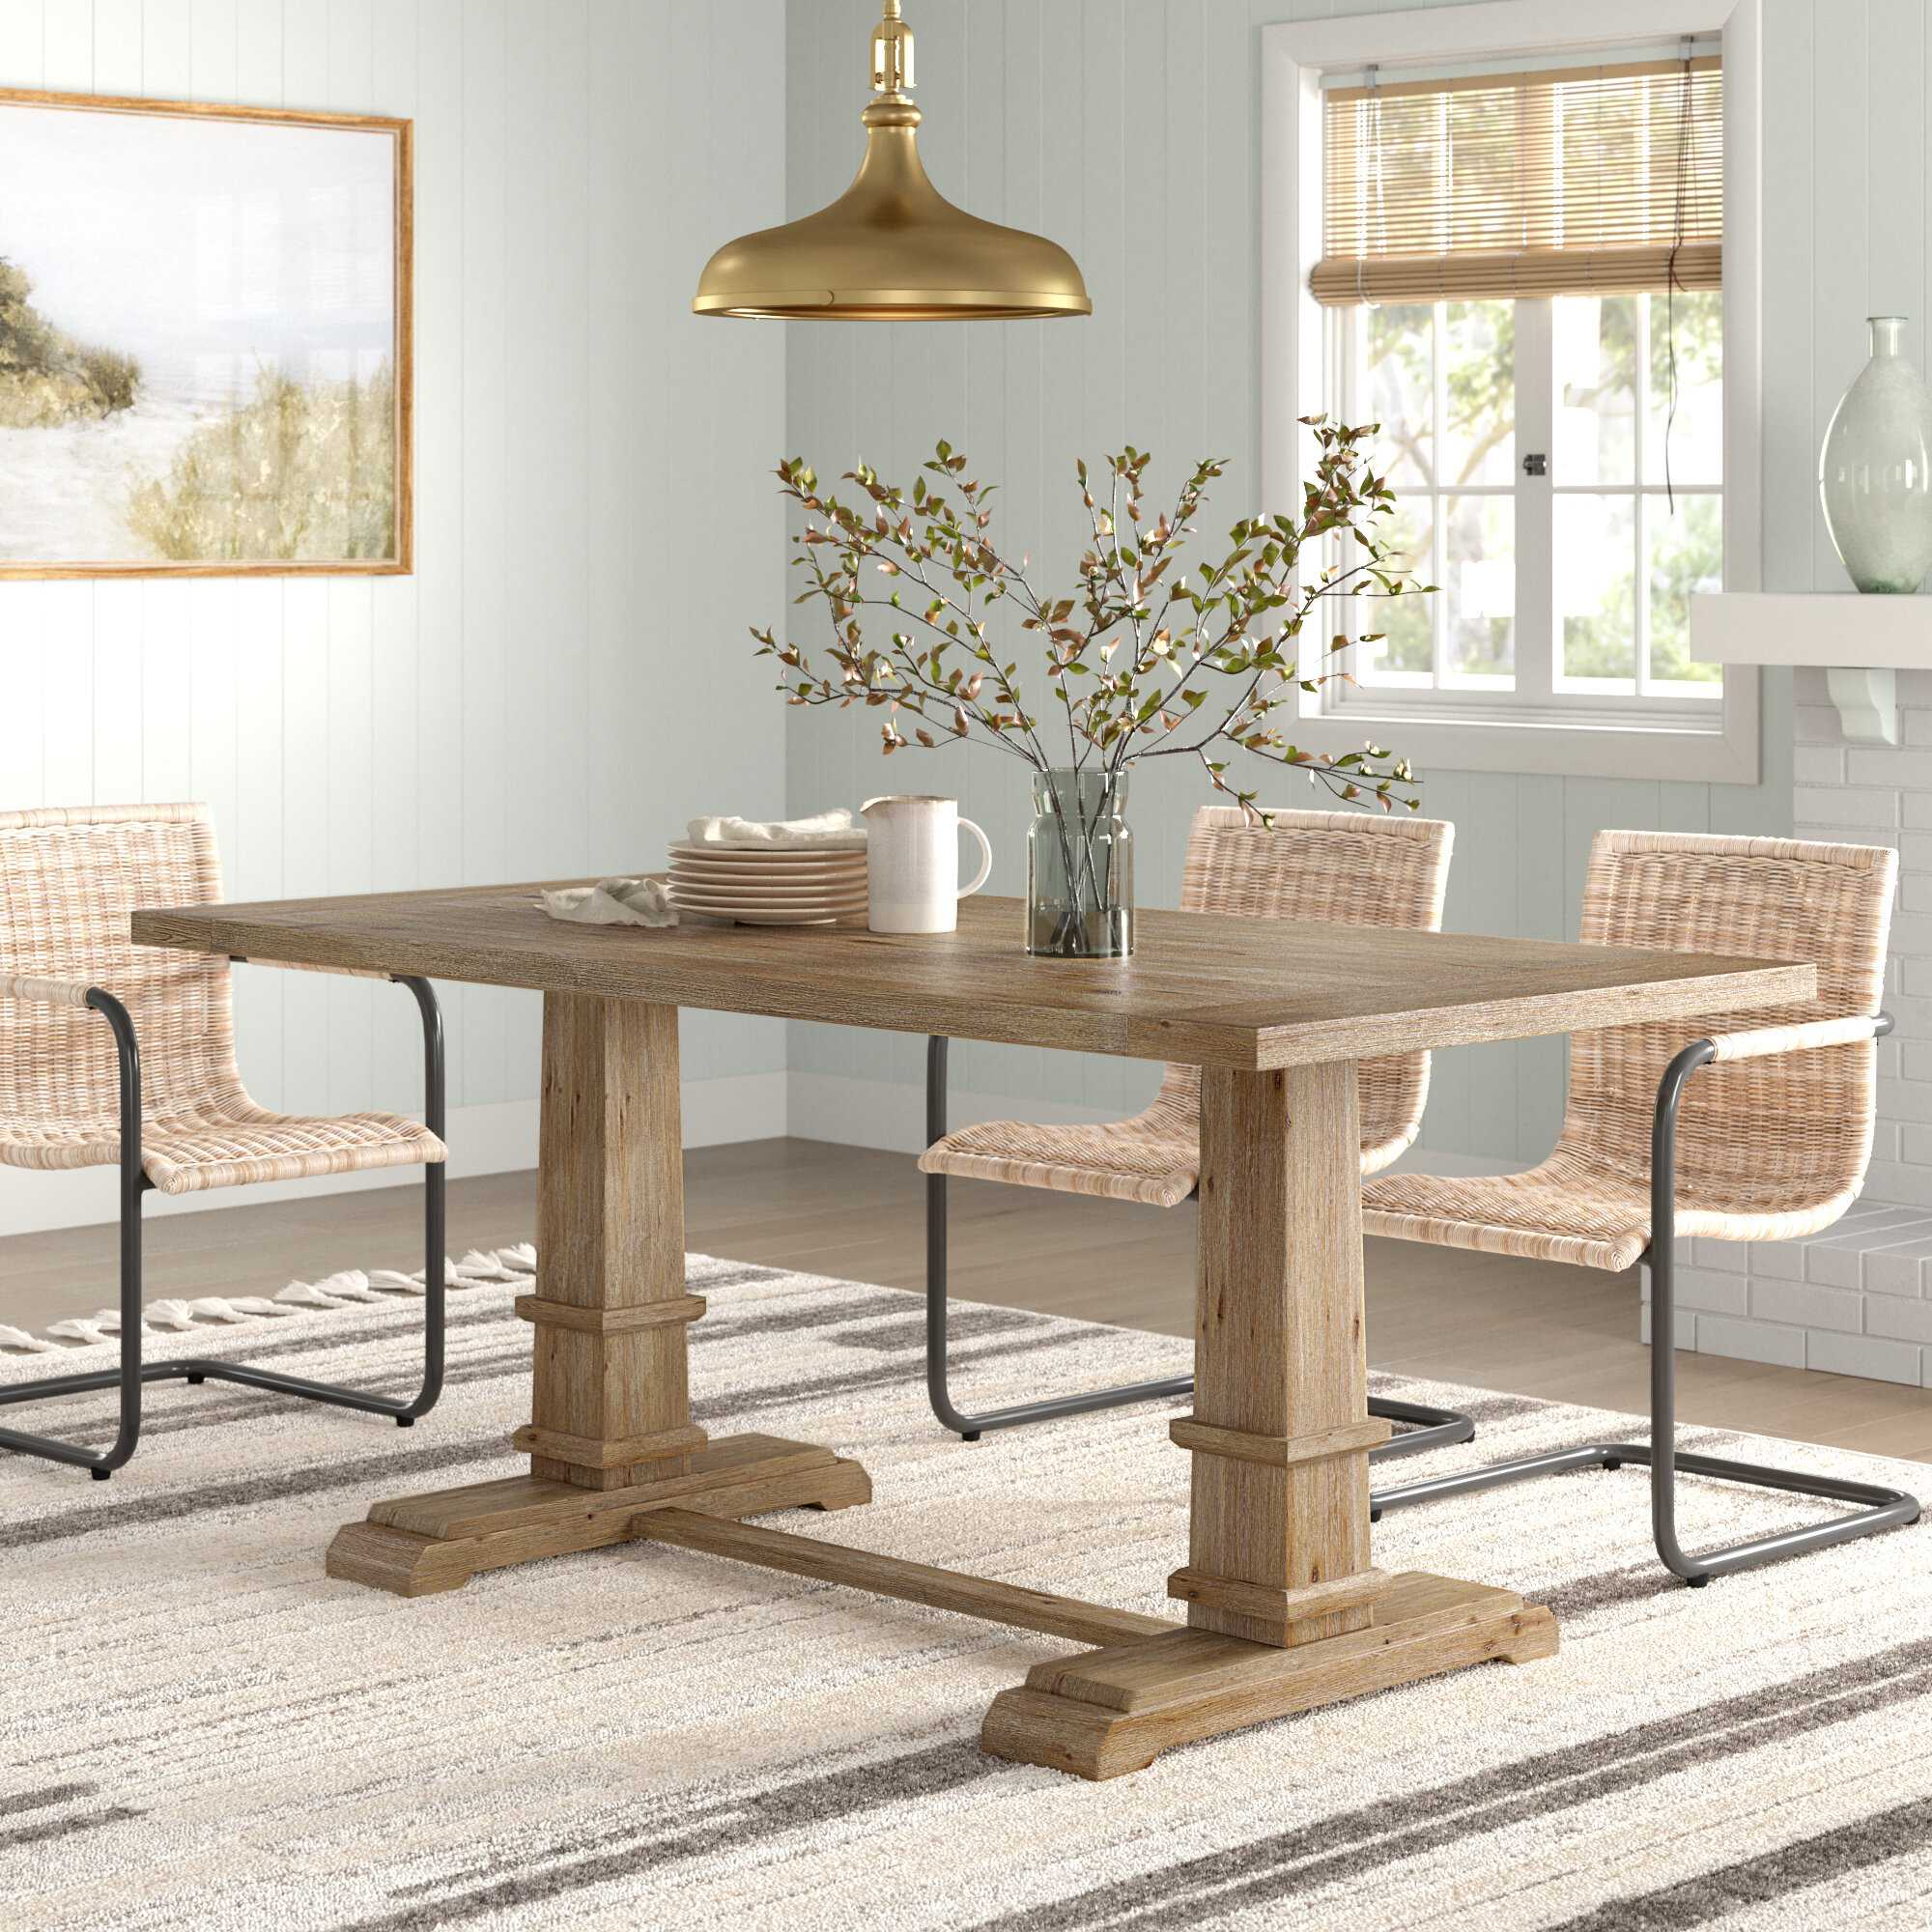 Sand & Stable Amelia Dining Table